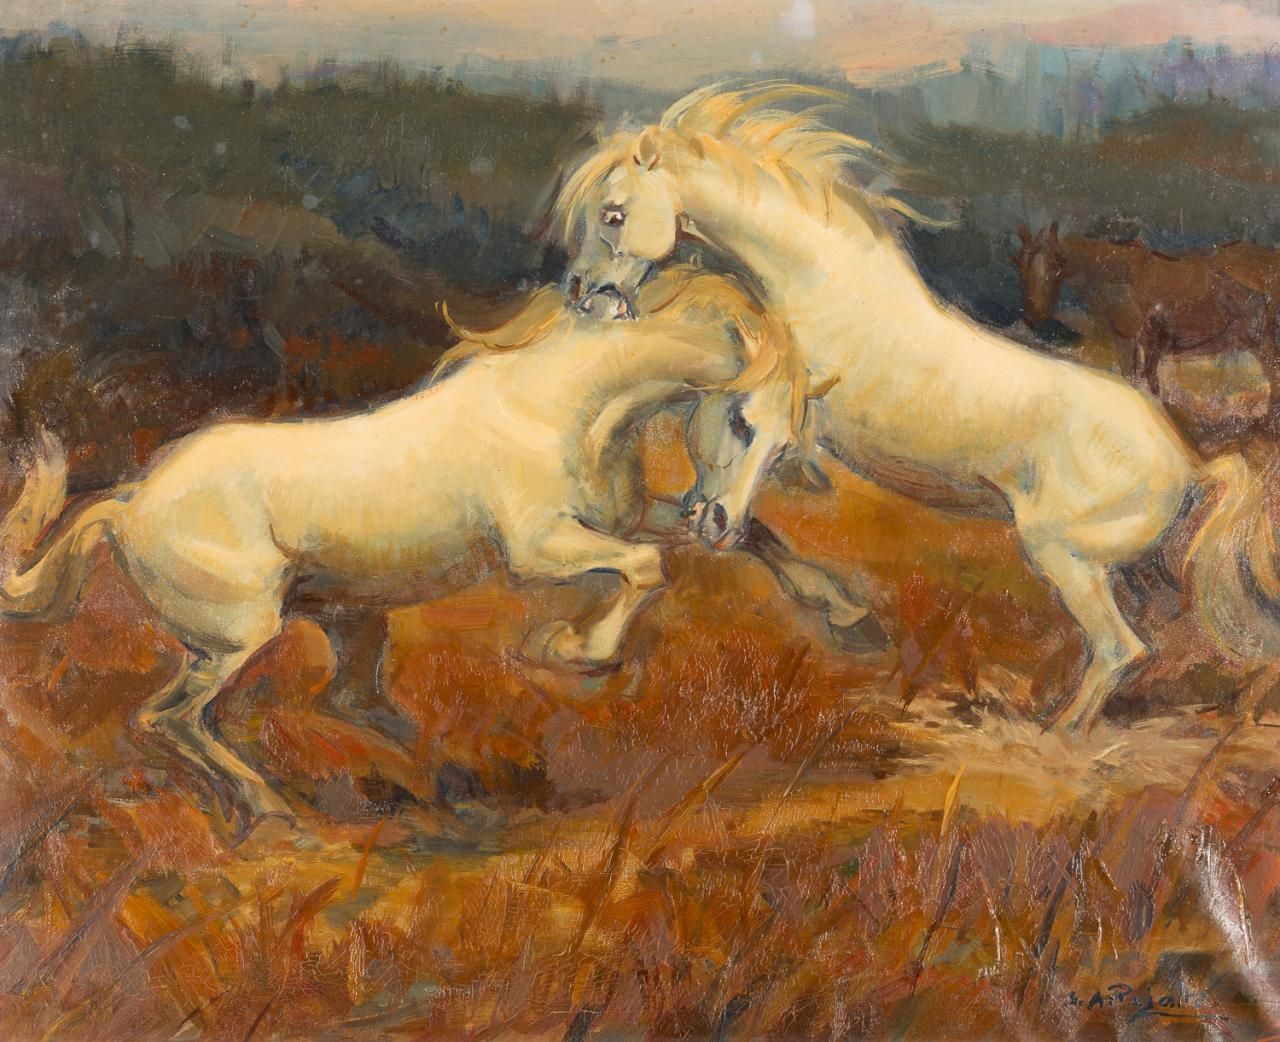 ESCUELA ESPAÑOLA, S. XX Horses
Oil on canvas
50 x 62 cm
Signed in the lower righ&hellip;